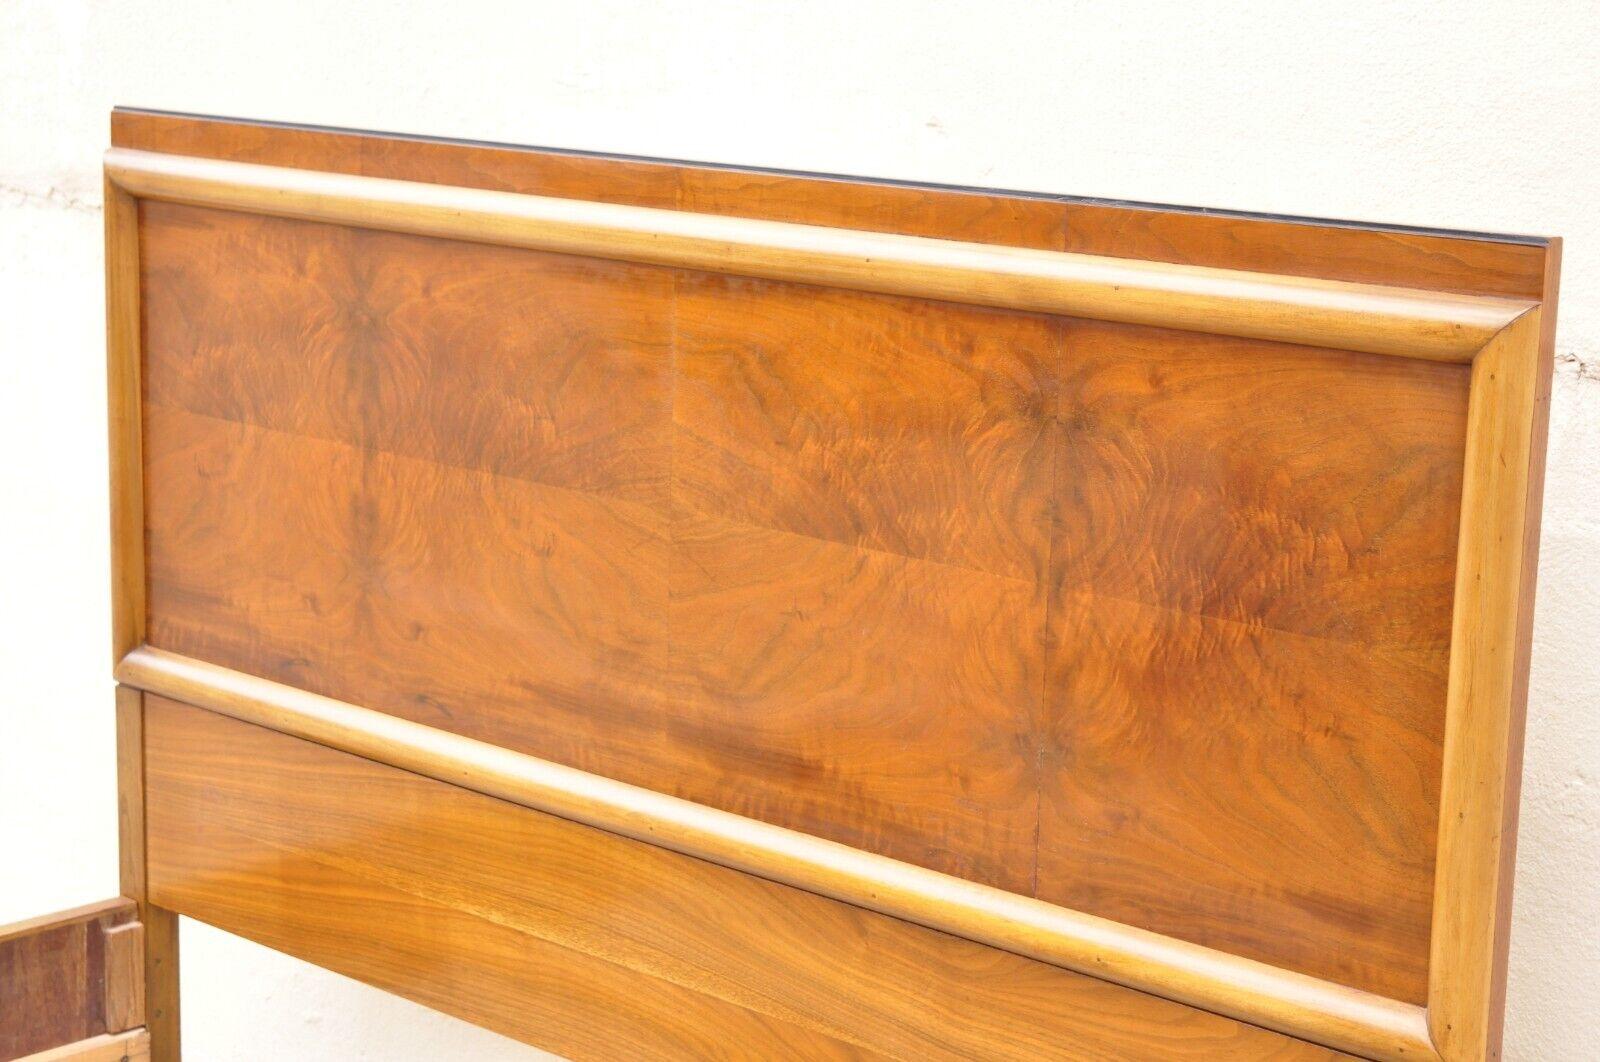 Joerns Bros Art Deco Burl Wood Walnut Full Size Bed Frame In Good Condition For Sale In Philadelphia, PA